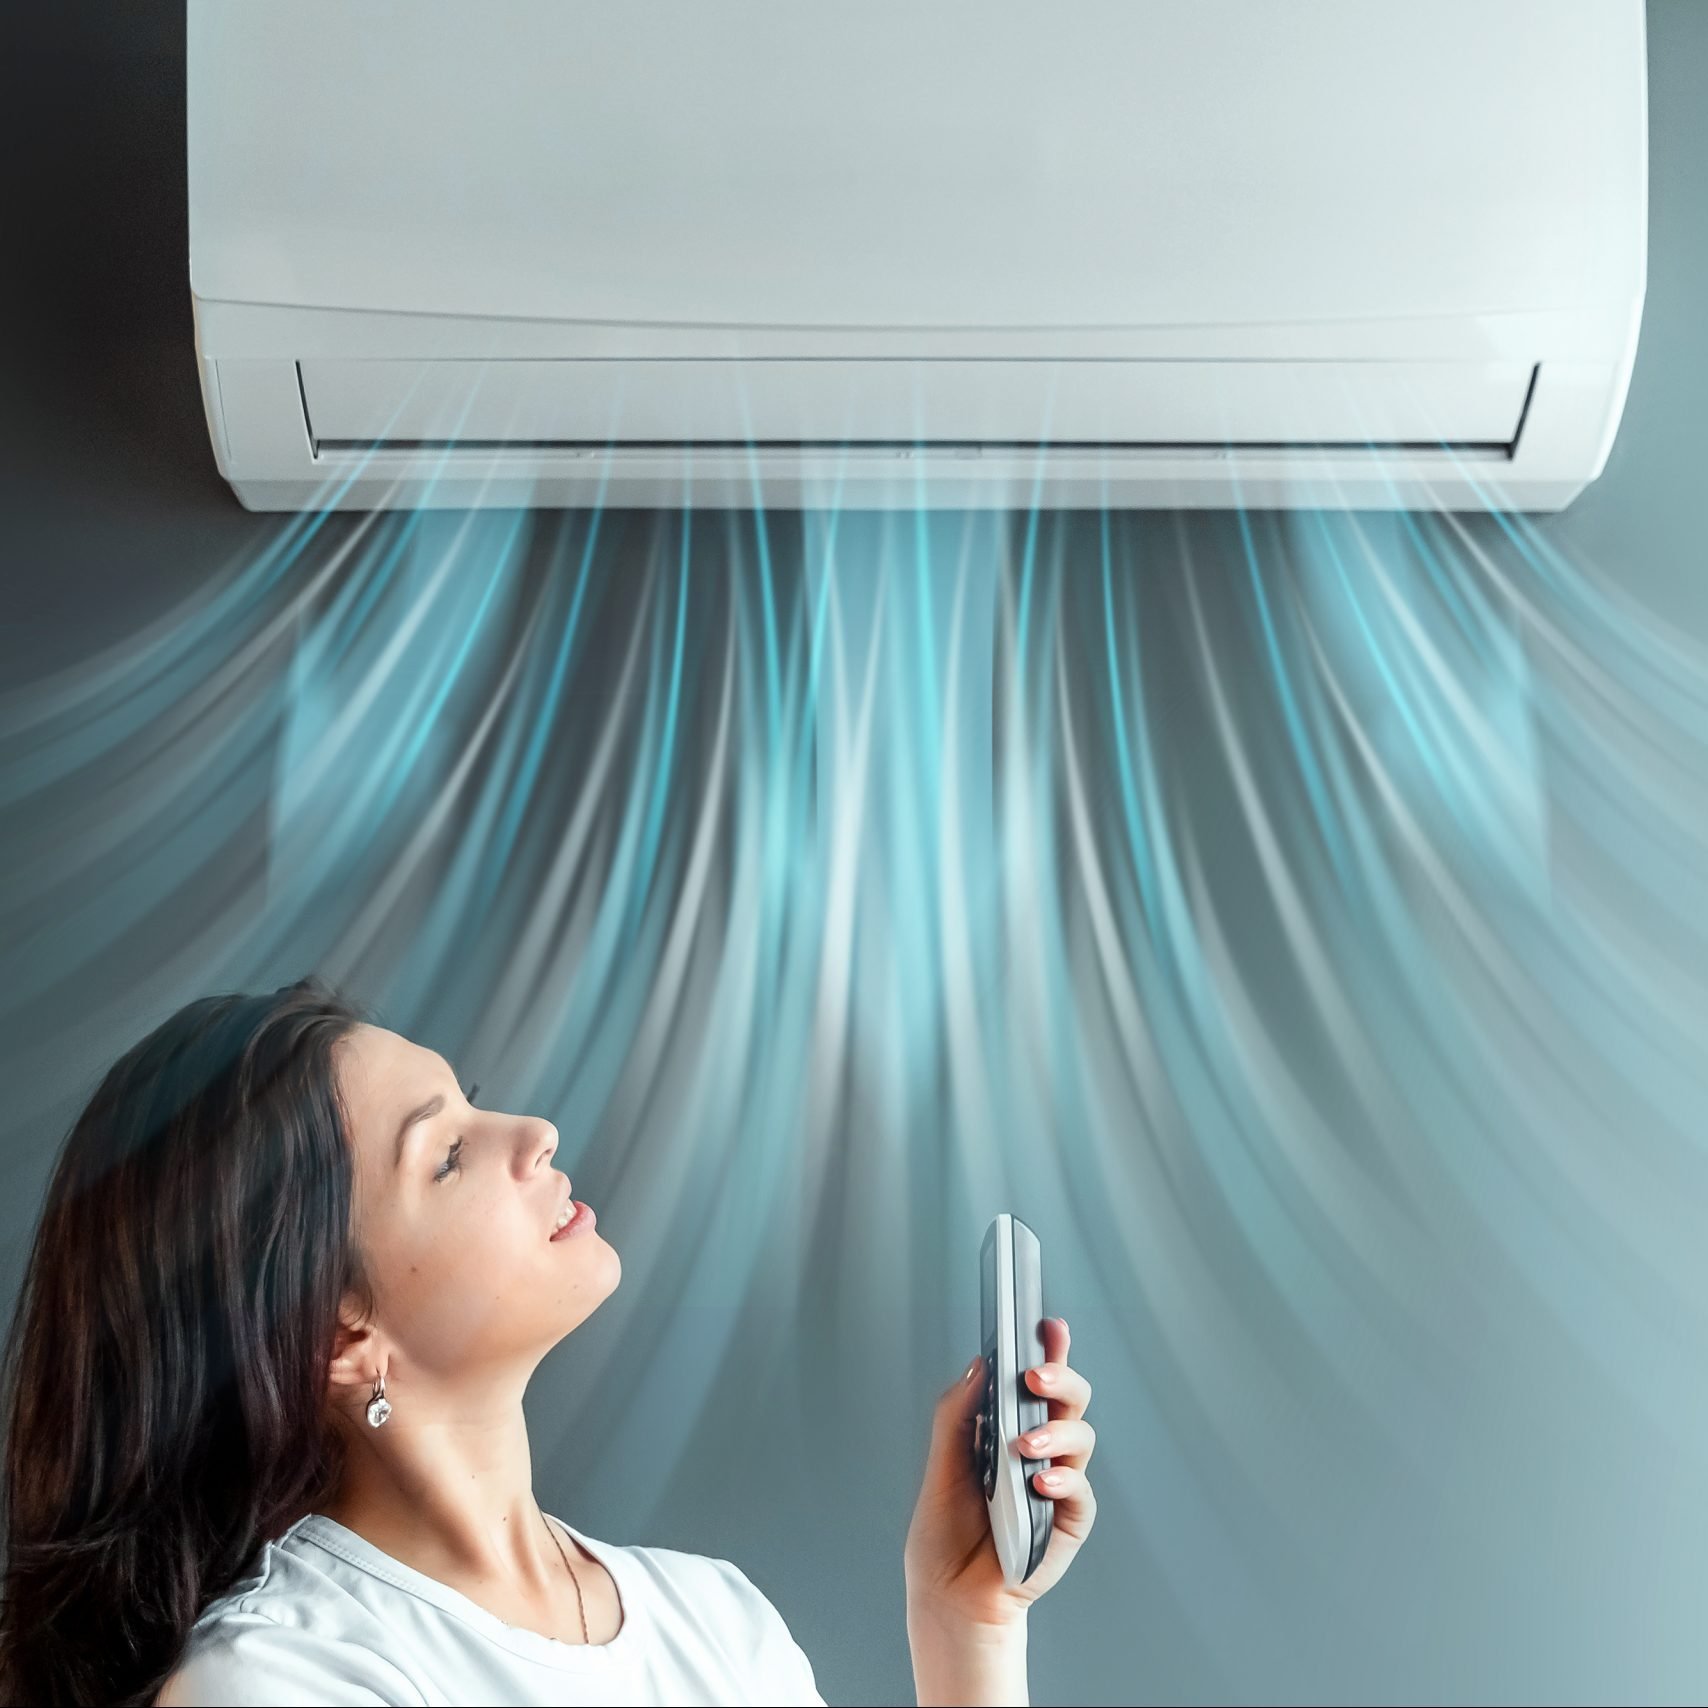 Air conditioning - Heating, ventilation, and air conditioning